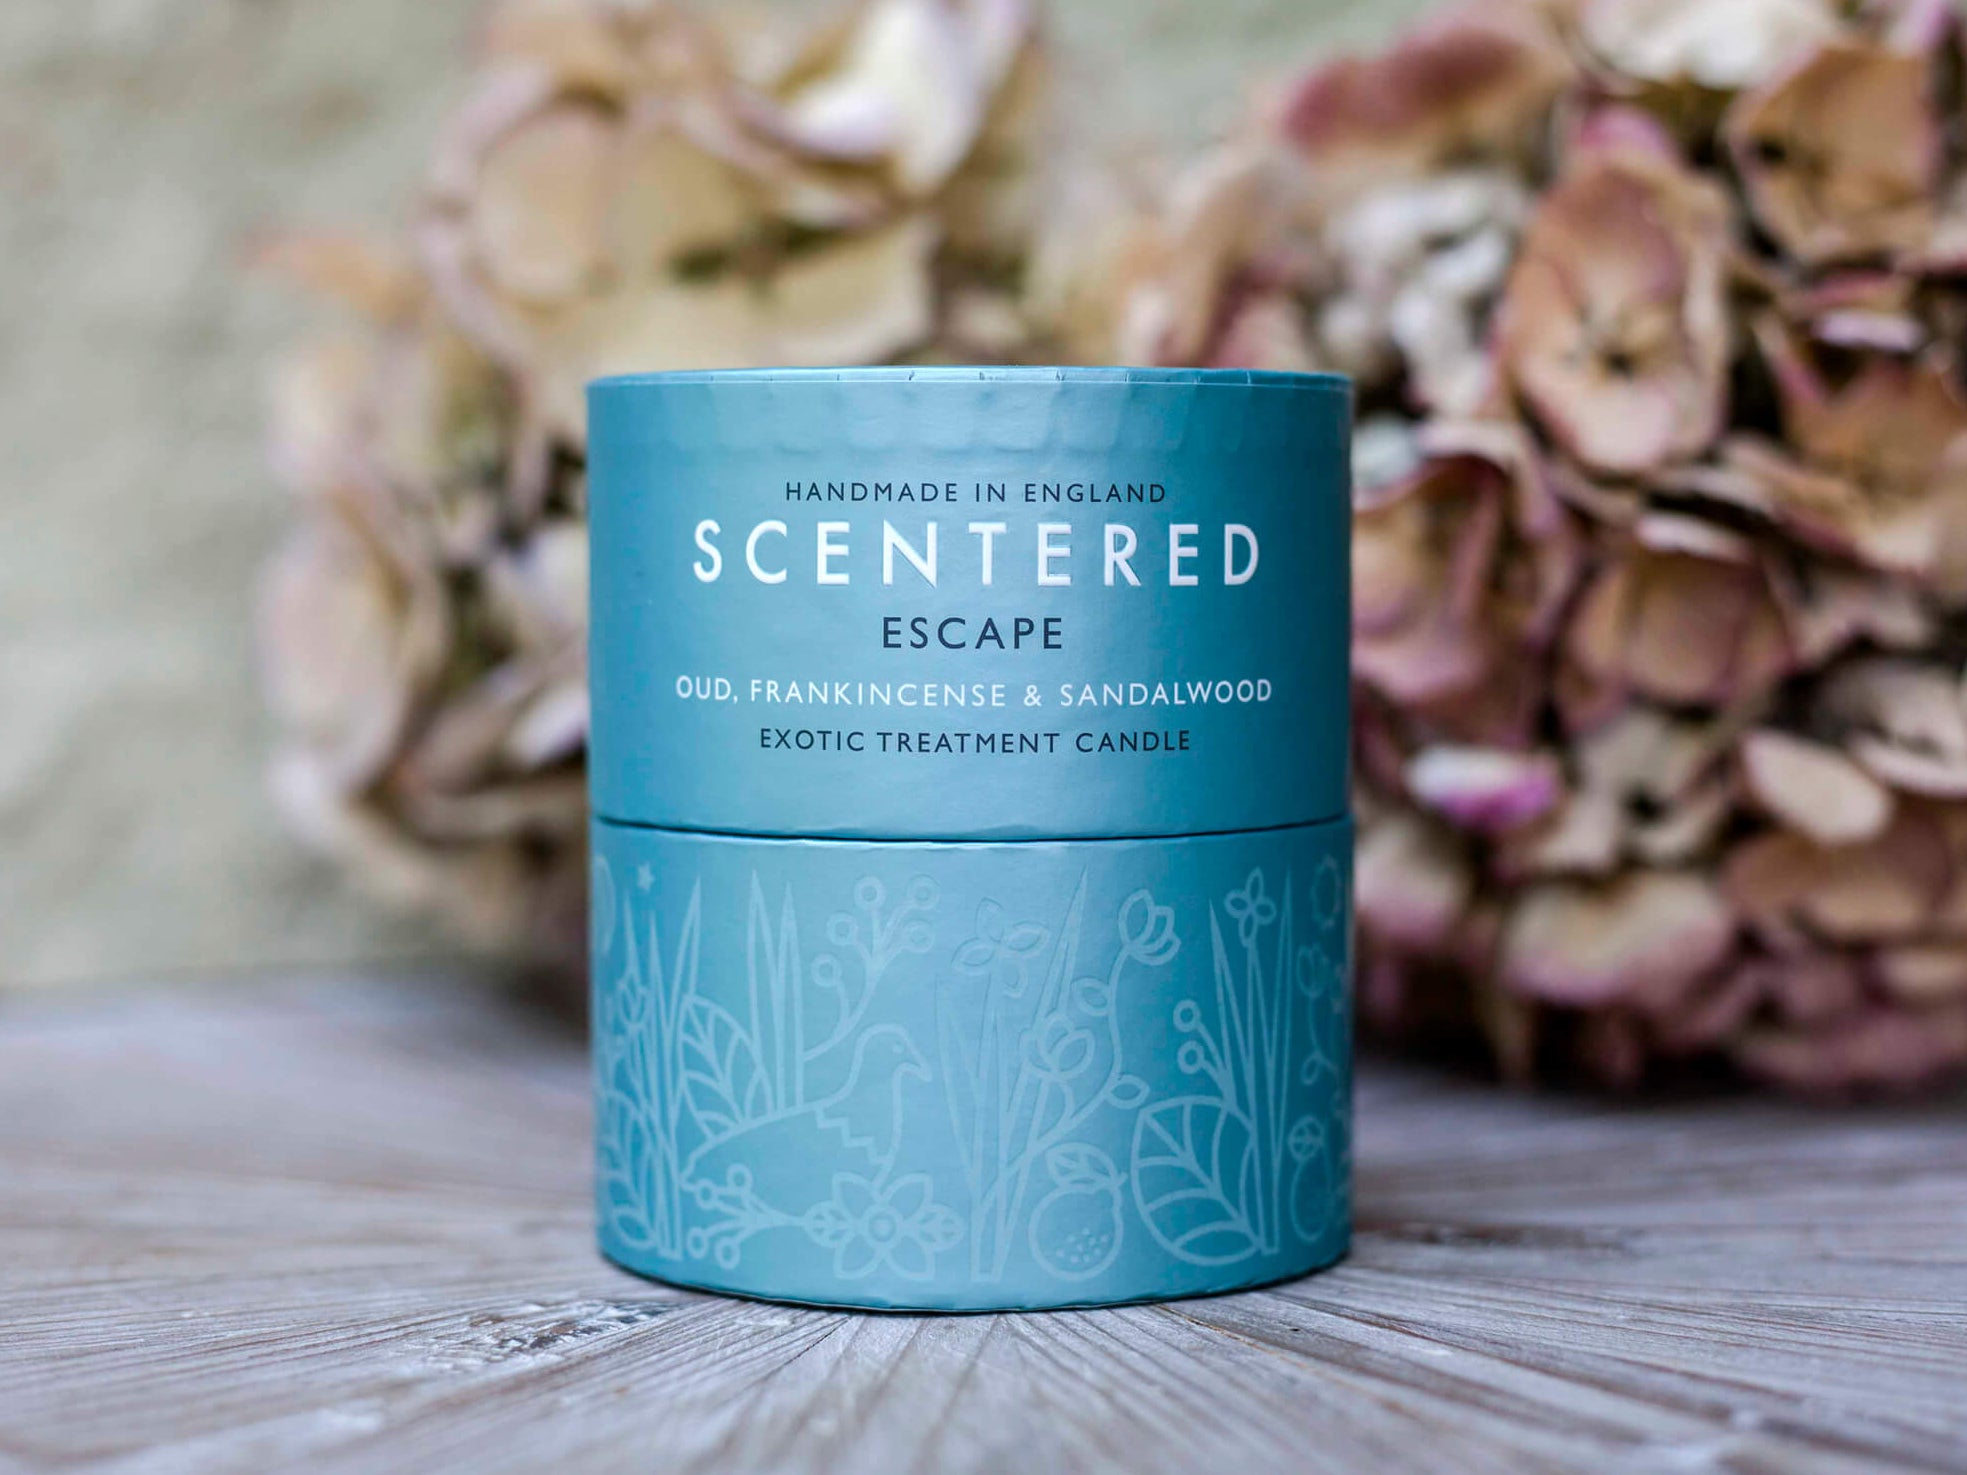 Scentered escape home aromatherapy candle.jpg